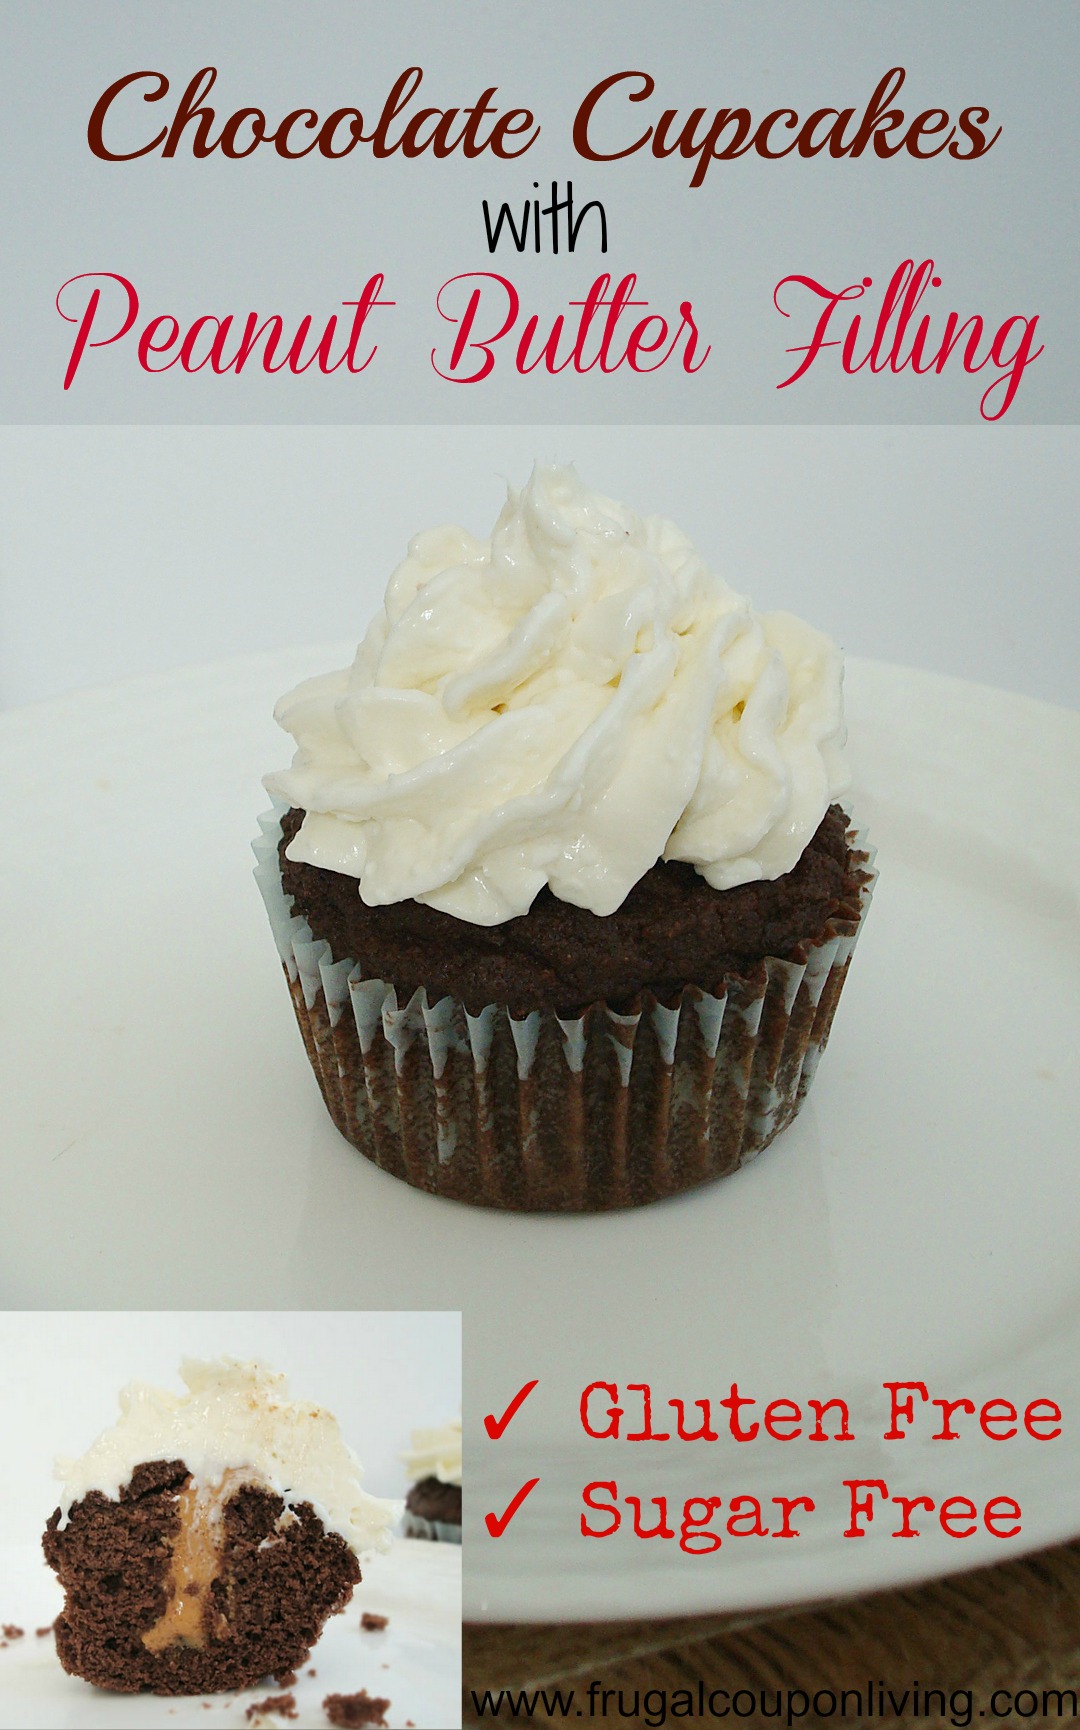 Peanut Butter Chocolate Cupcakes with Filling Recipe